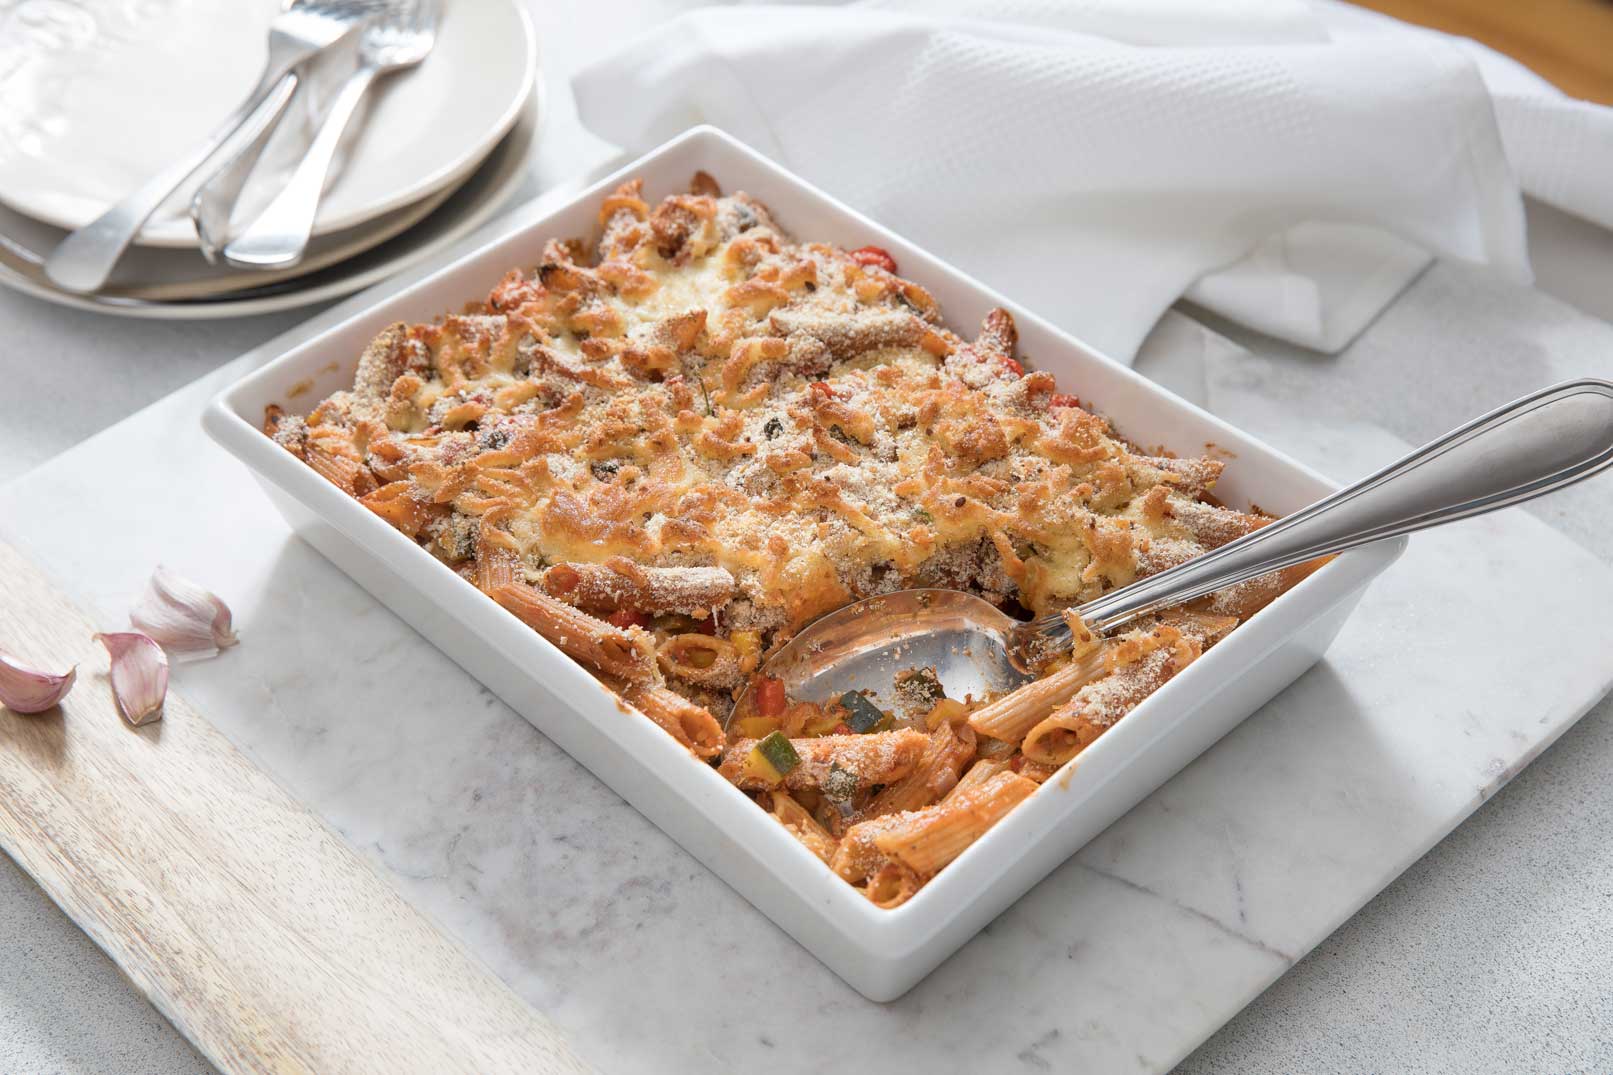 Vegetable pasta bake in a large white rectangle baking dish with a serving spoon and scoop taken out, served on a marble look cutting board with garlic cloves, three plates, cutlery and a white cloth napkin on the wide.